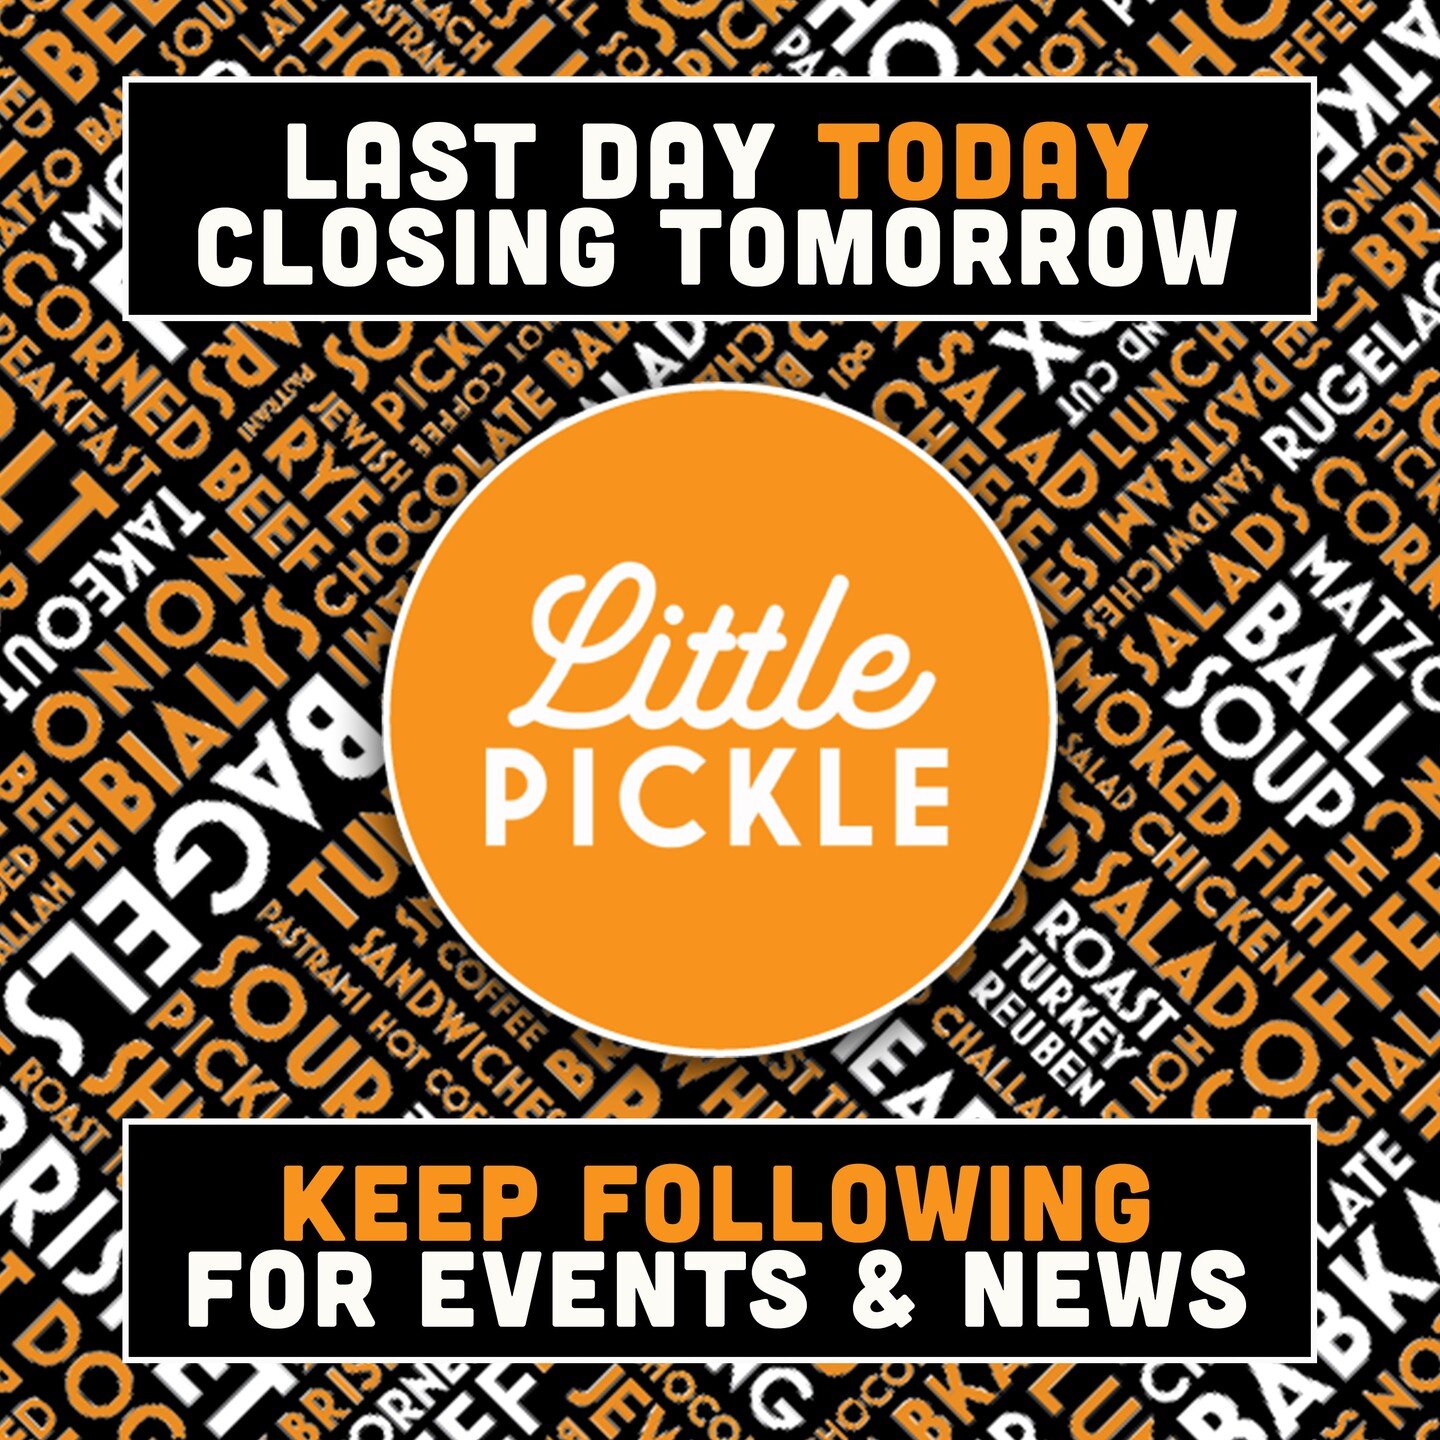 WHAT A RIDE!!! We had planned on closing Friday, but you guys cleaned us out! We literally ran out of food! For all my pickle people, fear not, there is an afterlife. We have some special events coming up to keep the mojo going as well as our upcomin